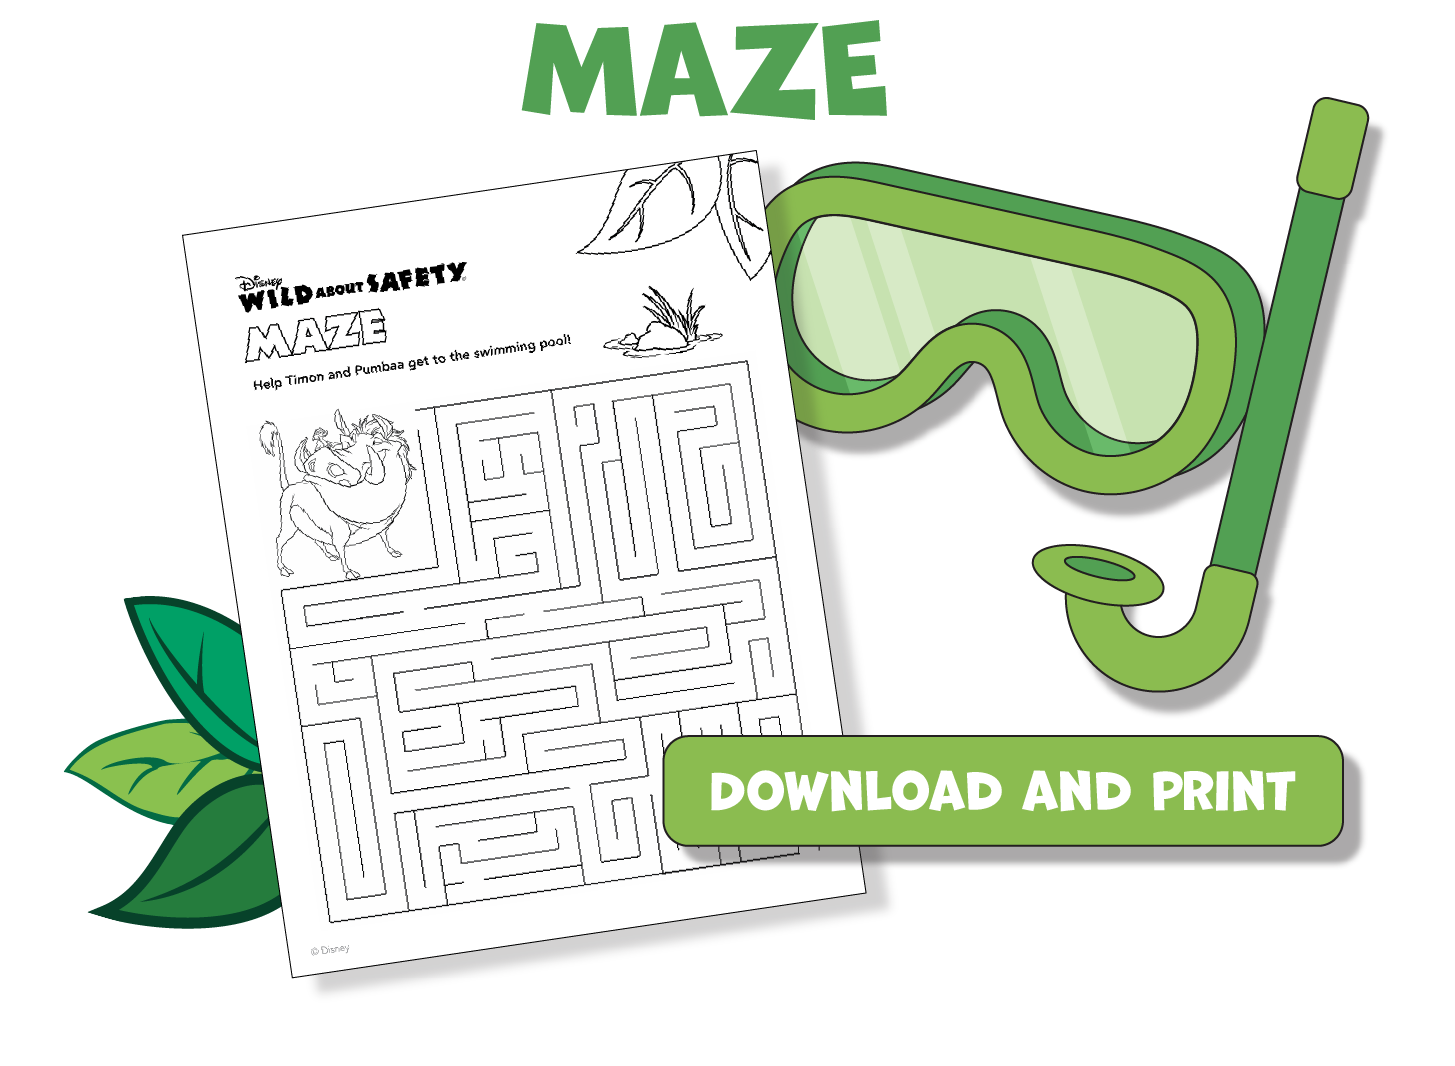 Download and print "Maze" activity sheet